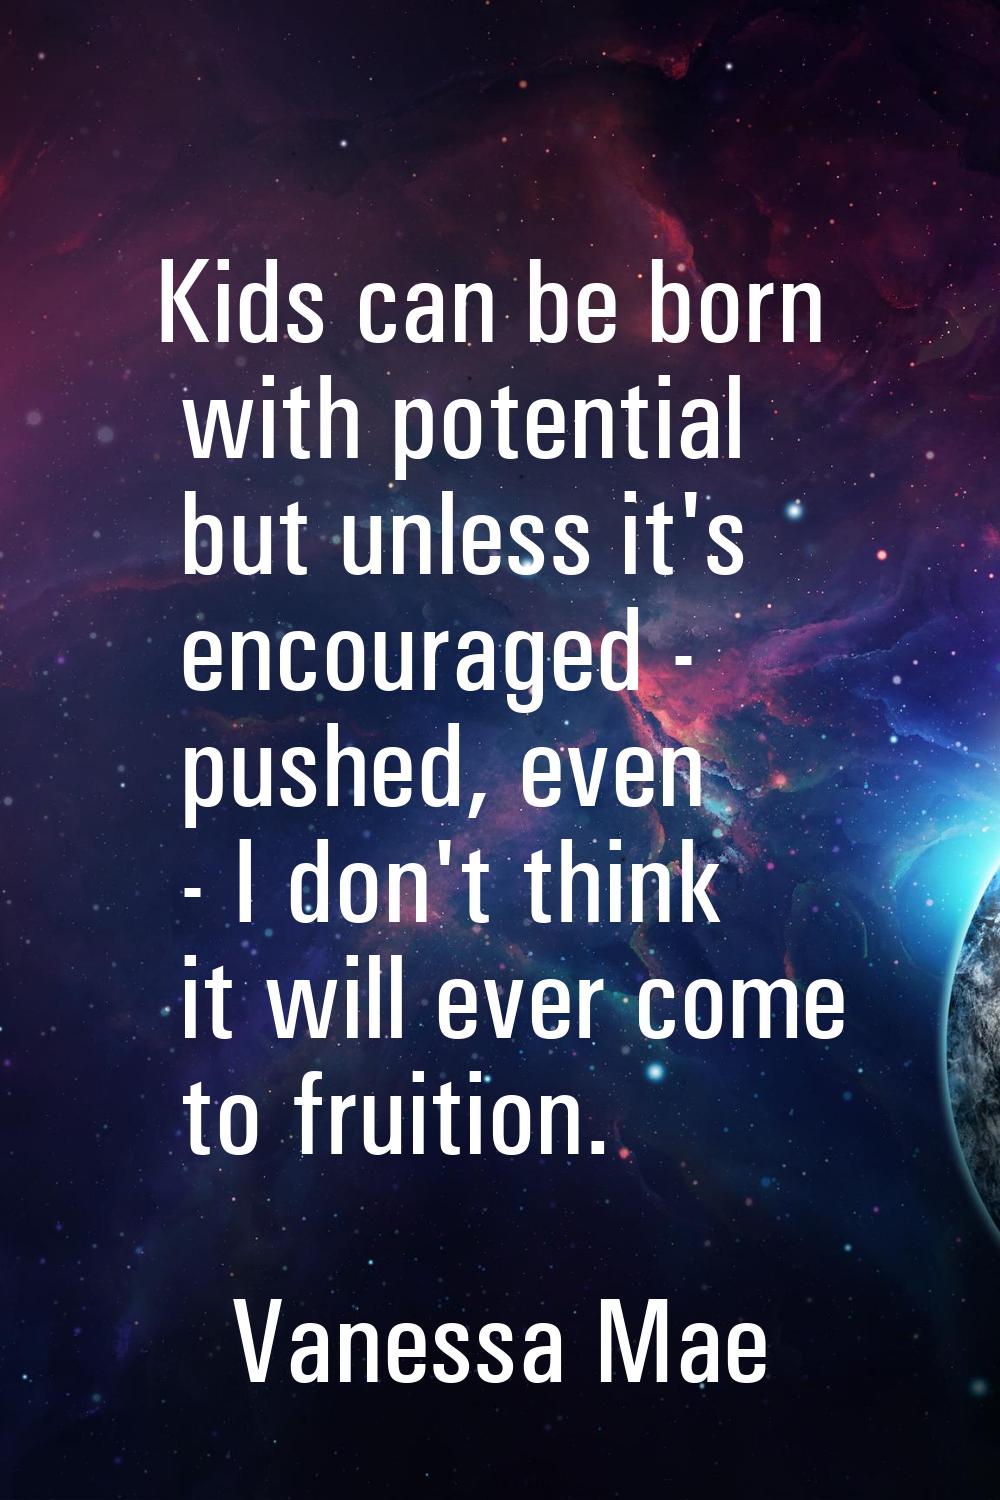 Kids can be born with potential but unless it's encouraged - pushed, even - I don't think it will e